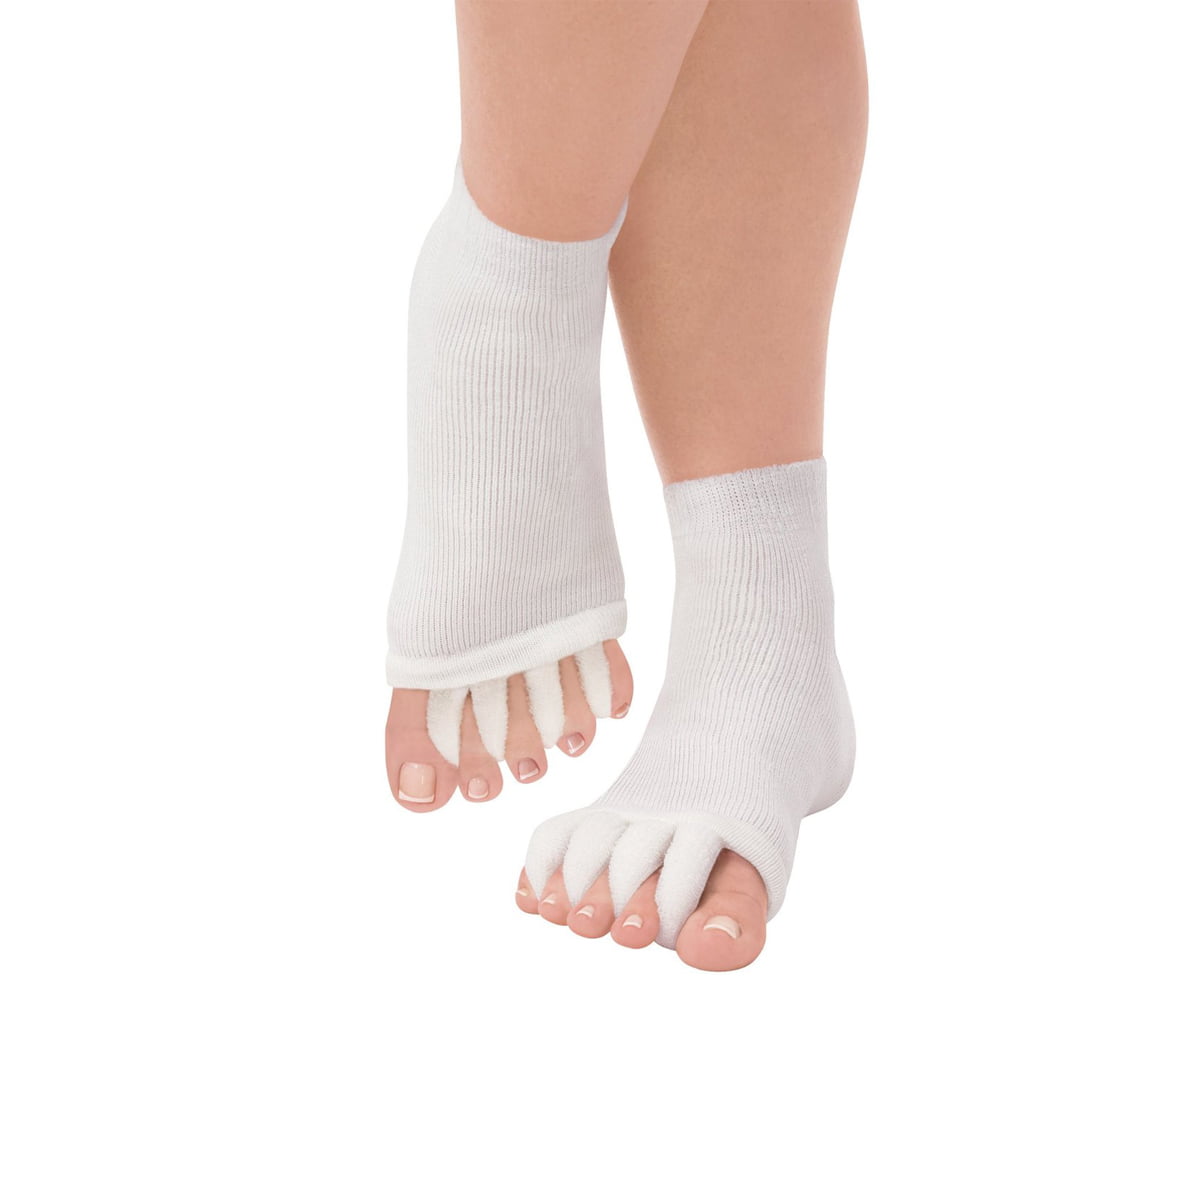 Alignment Socks Toe Separator Foot Toes Pain Relief Stripes Soft Spa Pedicure 